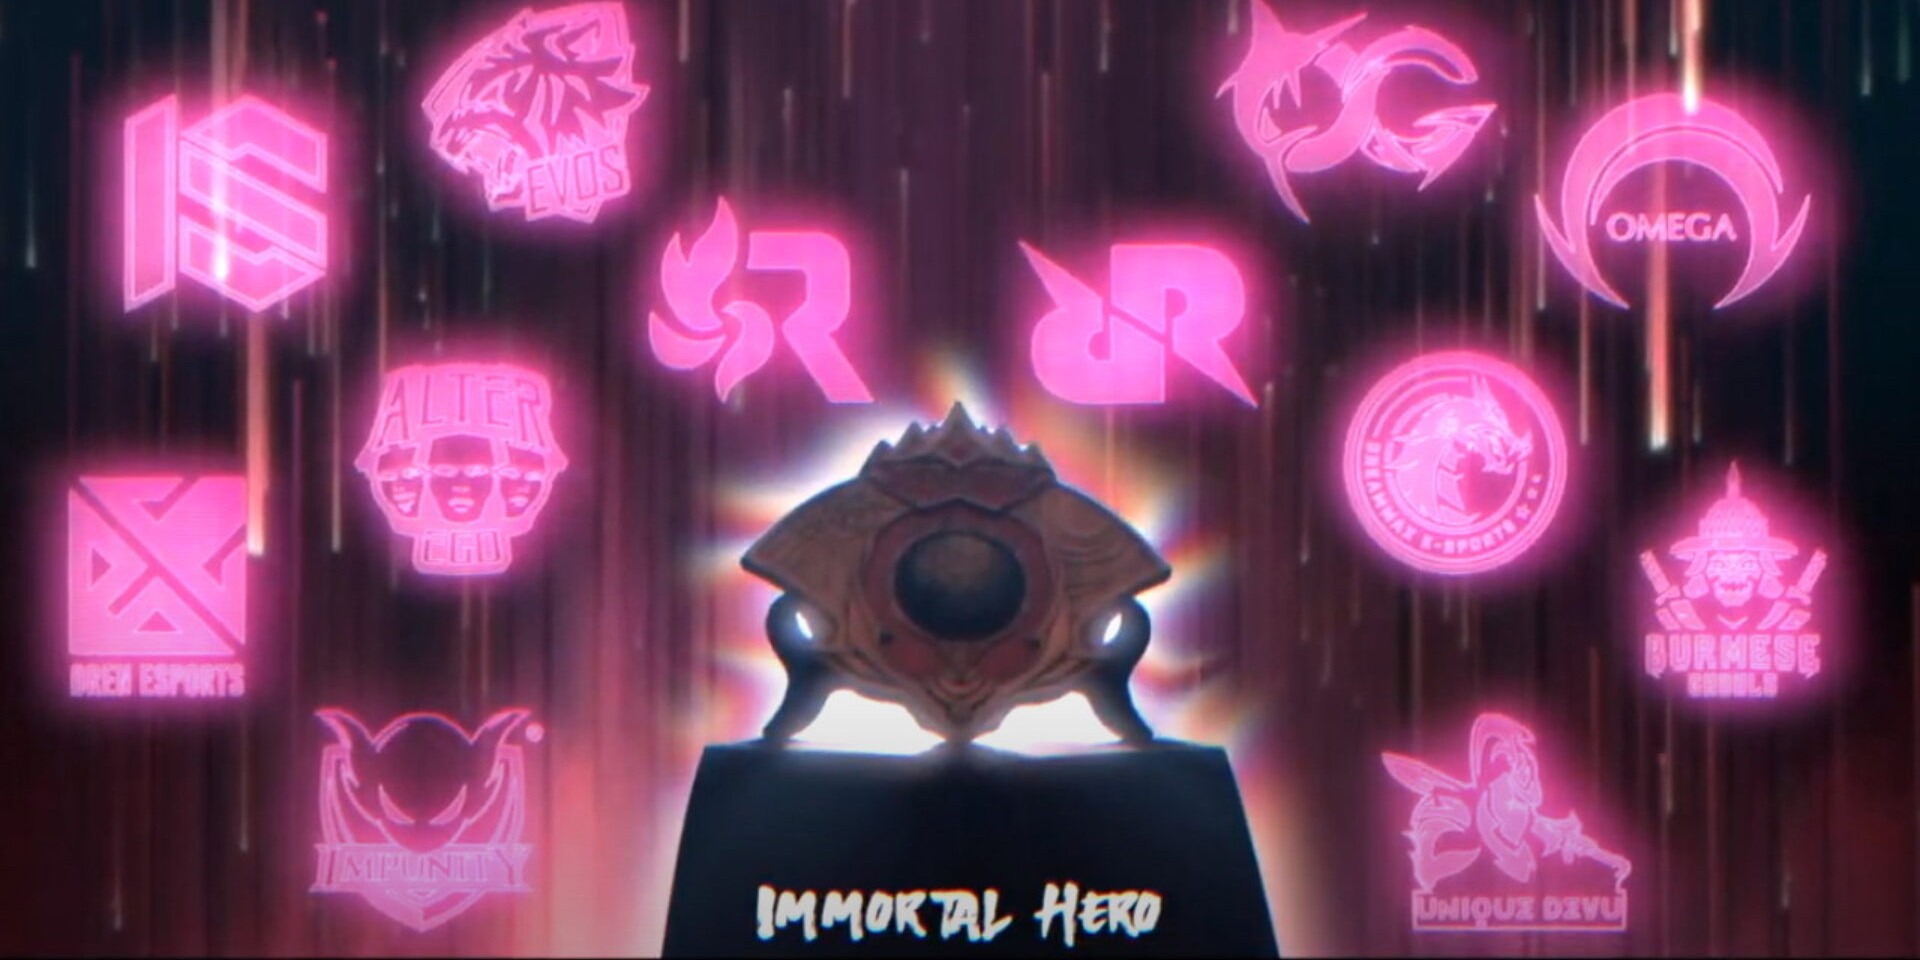 Mobile Legends releases M2 World Championship theme song 'Immortal Hero' with remixes by Joe Flizzow, ShiGGa Shay, King Promdi, and more – watch